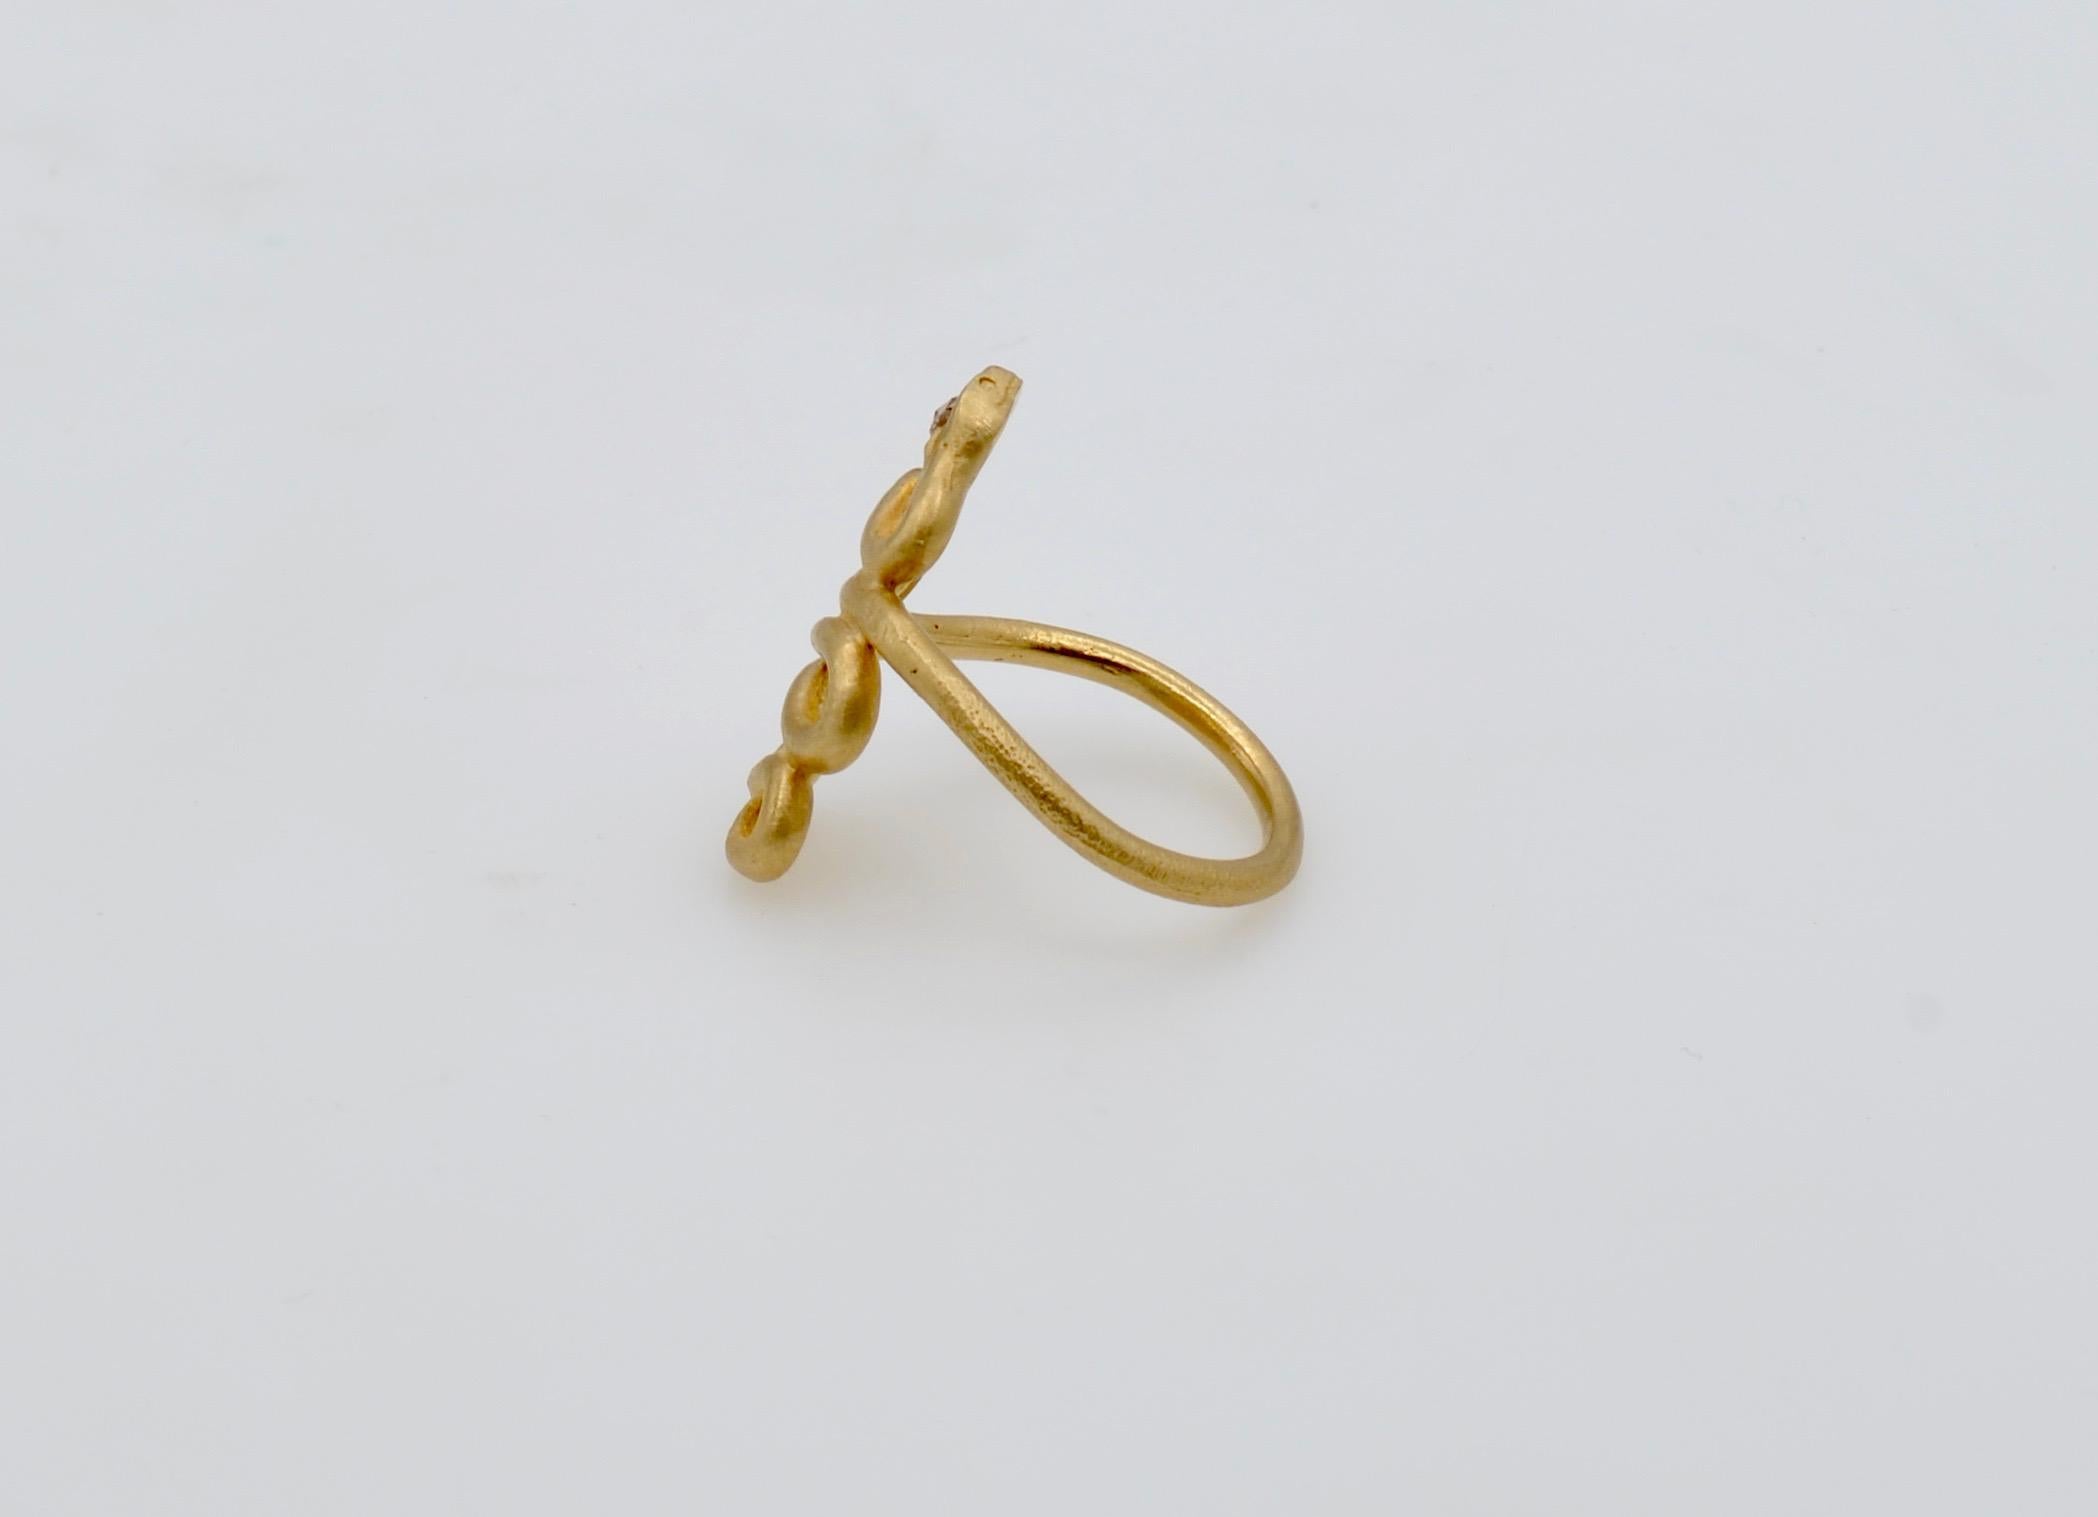 This snake ring is fun and fanciful. It has a 0.05 carat rose cut diamond in the head that has a beautiful sparkle offset by the matte finish of the yellow gold. The shape of the snake is elegant on the finger and is comfortable to wear. A beautiful